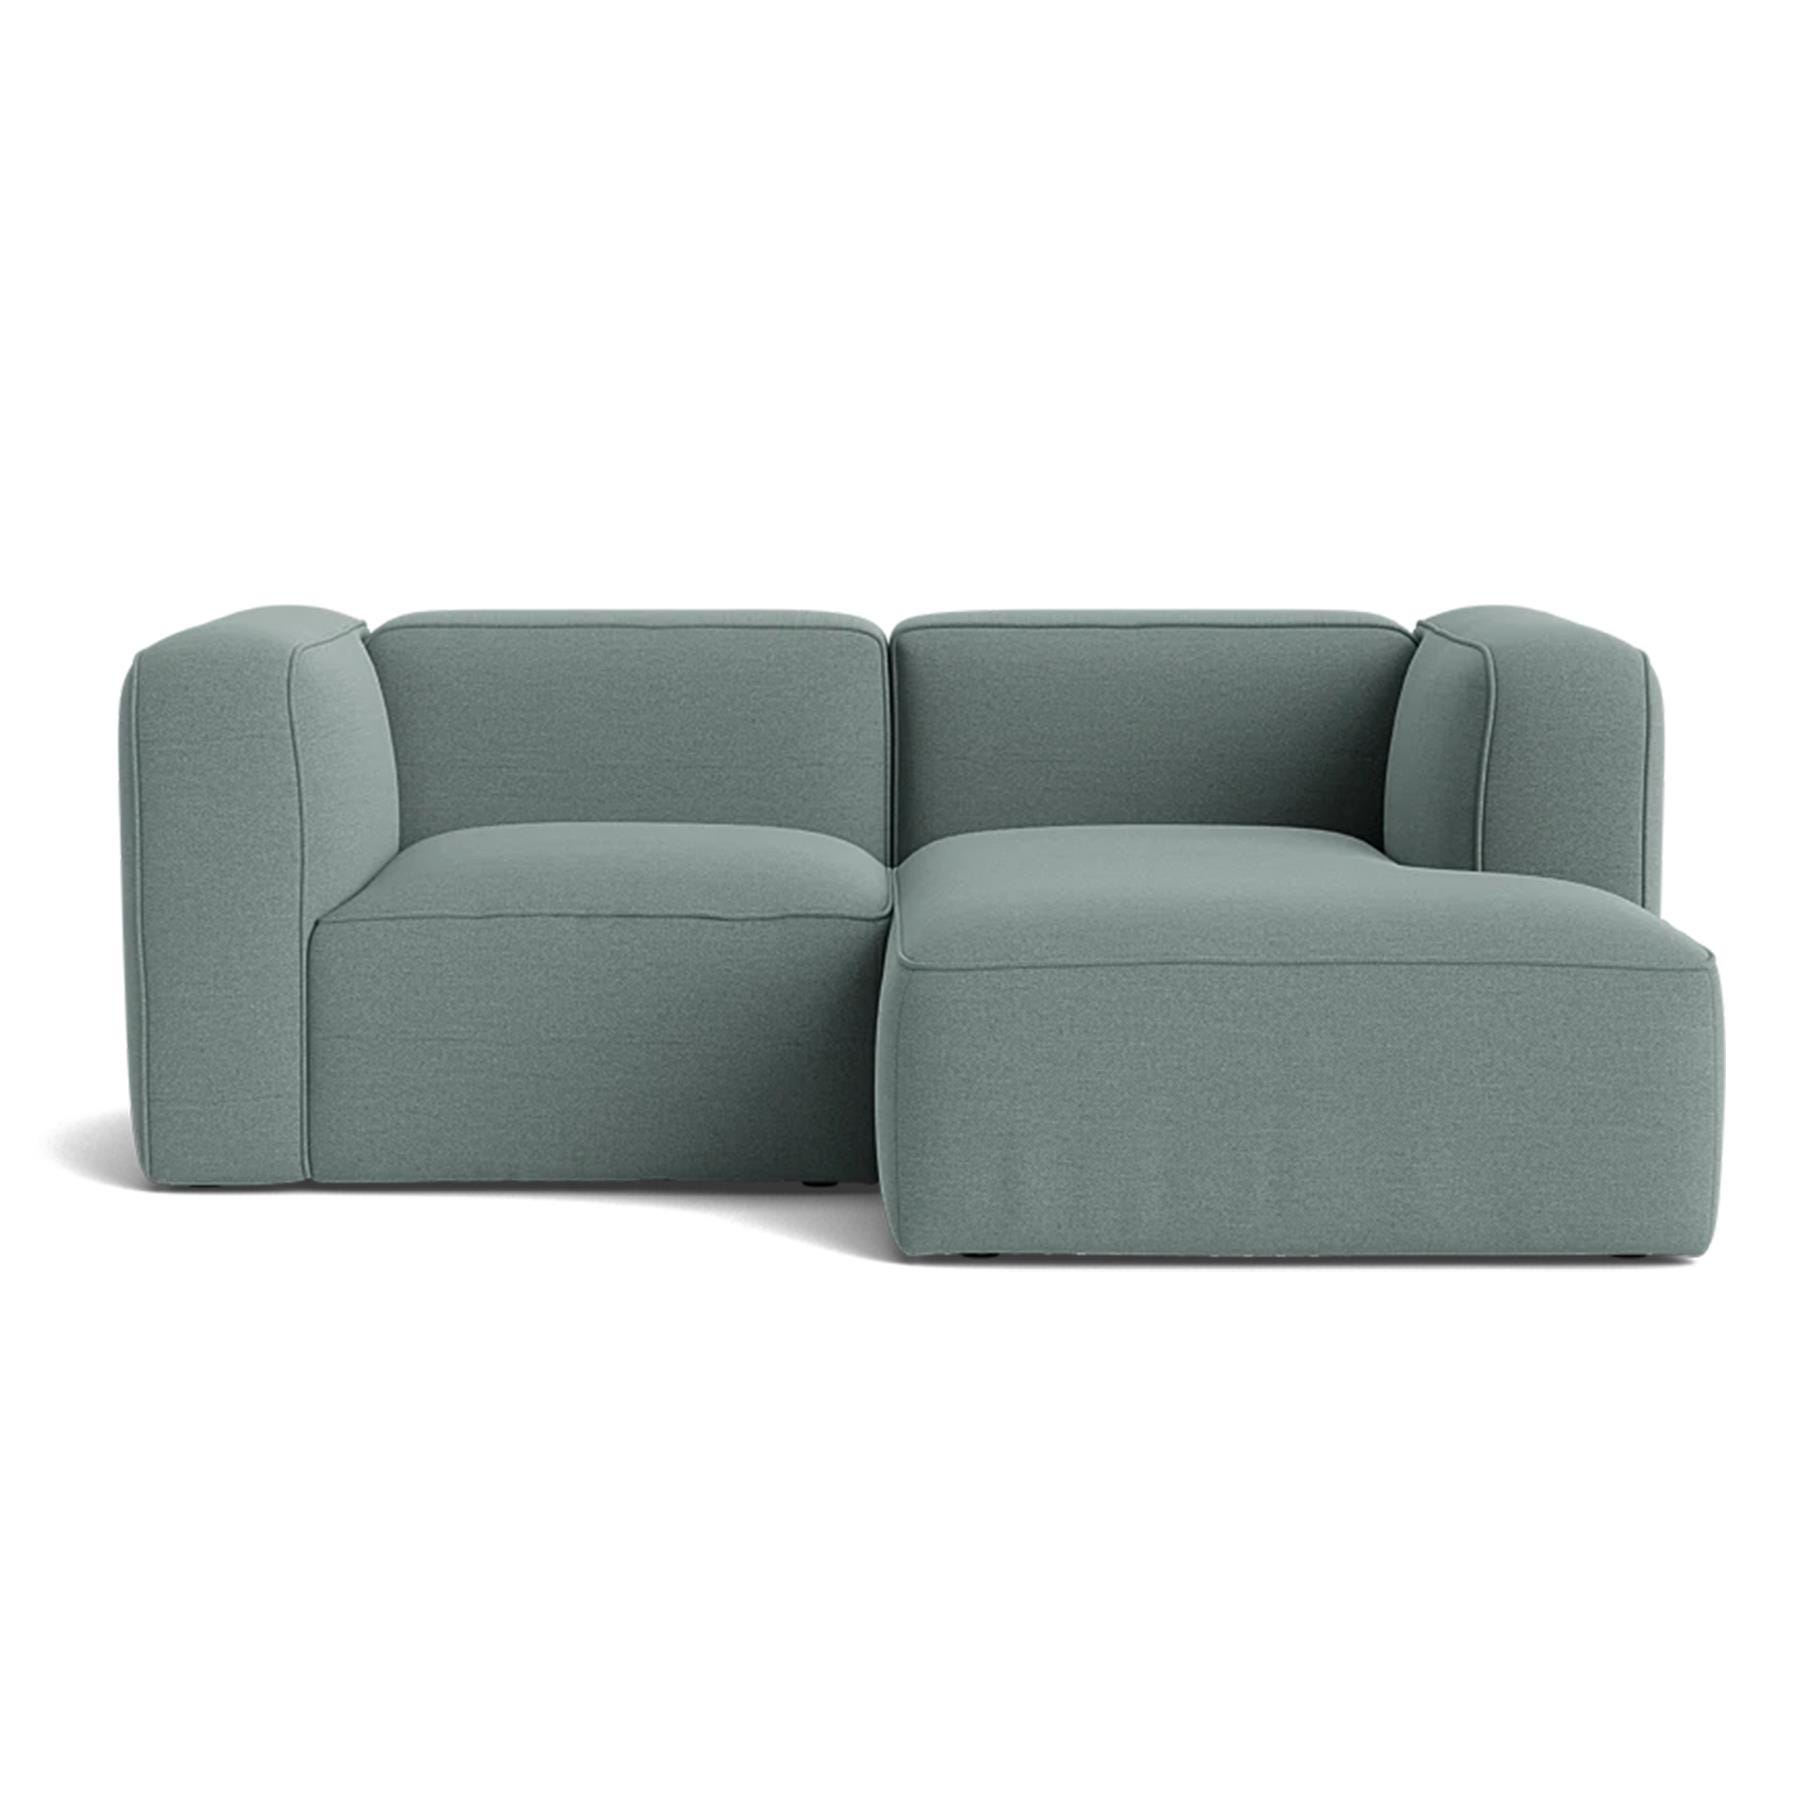 Make Nordic Basecamp Small Sofa Rewool 868 Right Green Designer Furniture From Holloways Of Ludlow